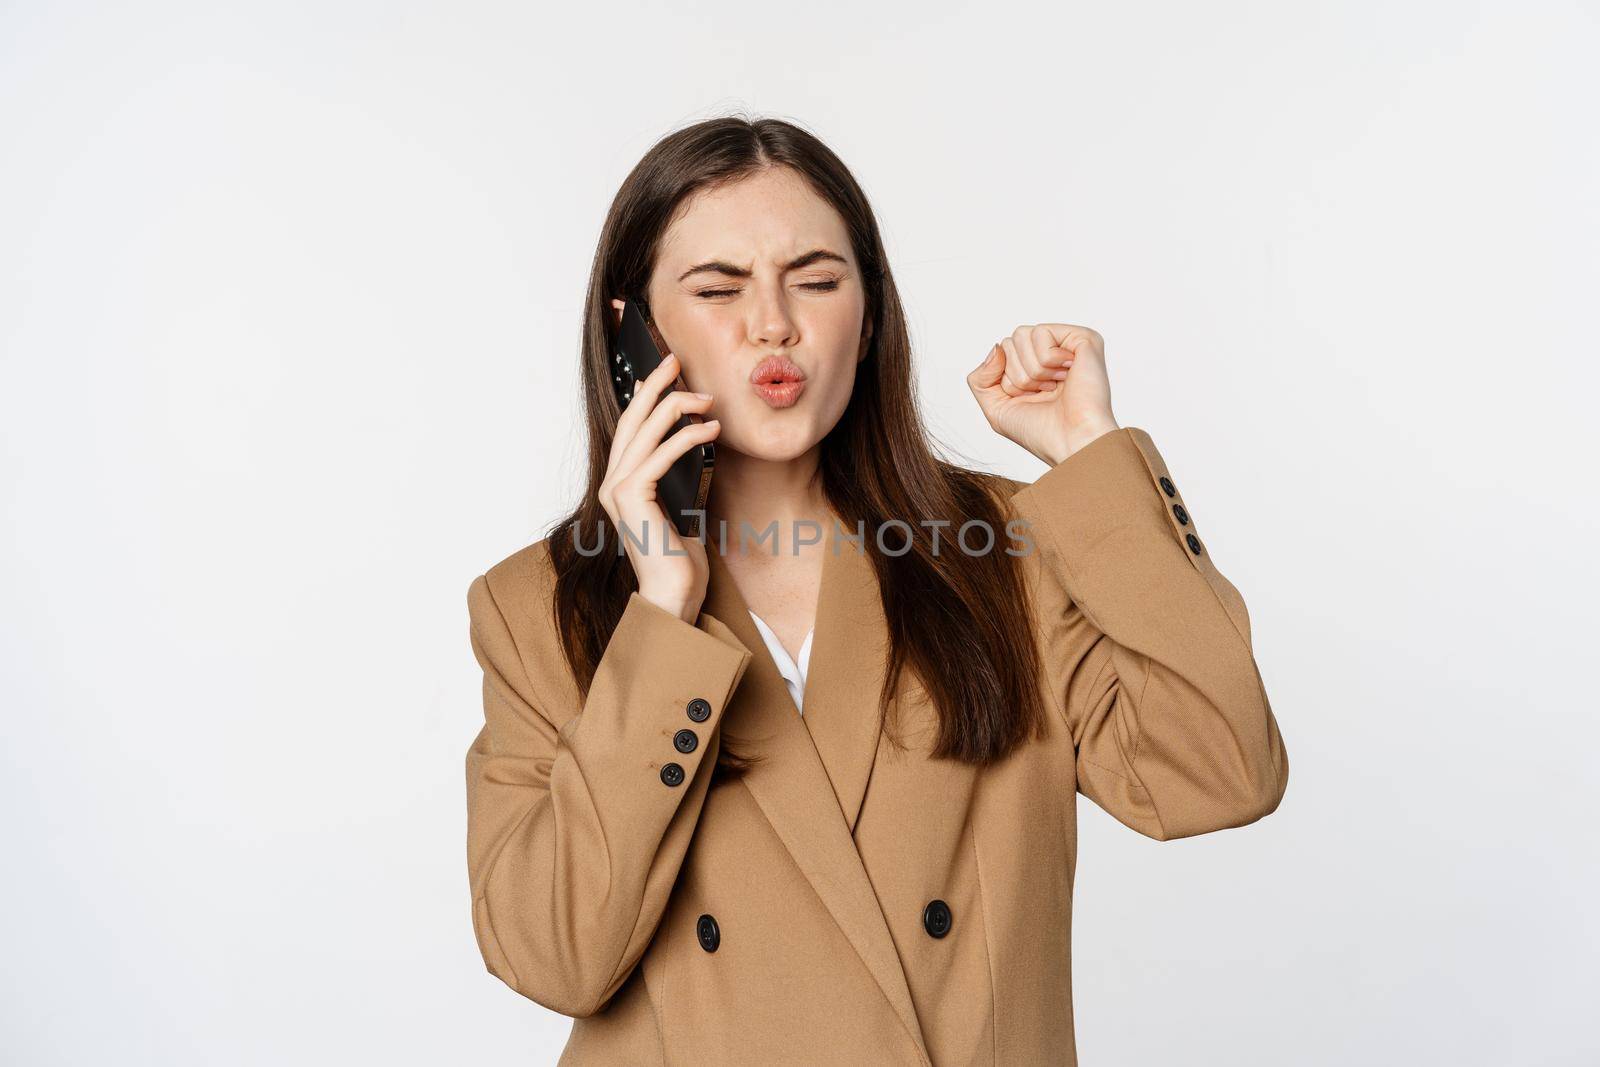 Enthusiastic businesswoman talking on mobile phone, reacting amazed and happy to call, recieve great news, standing over white background.